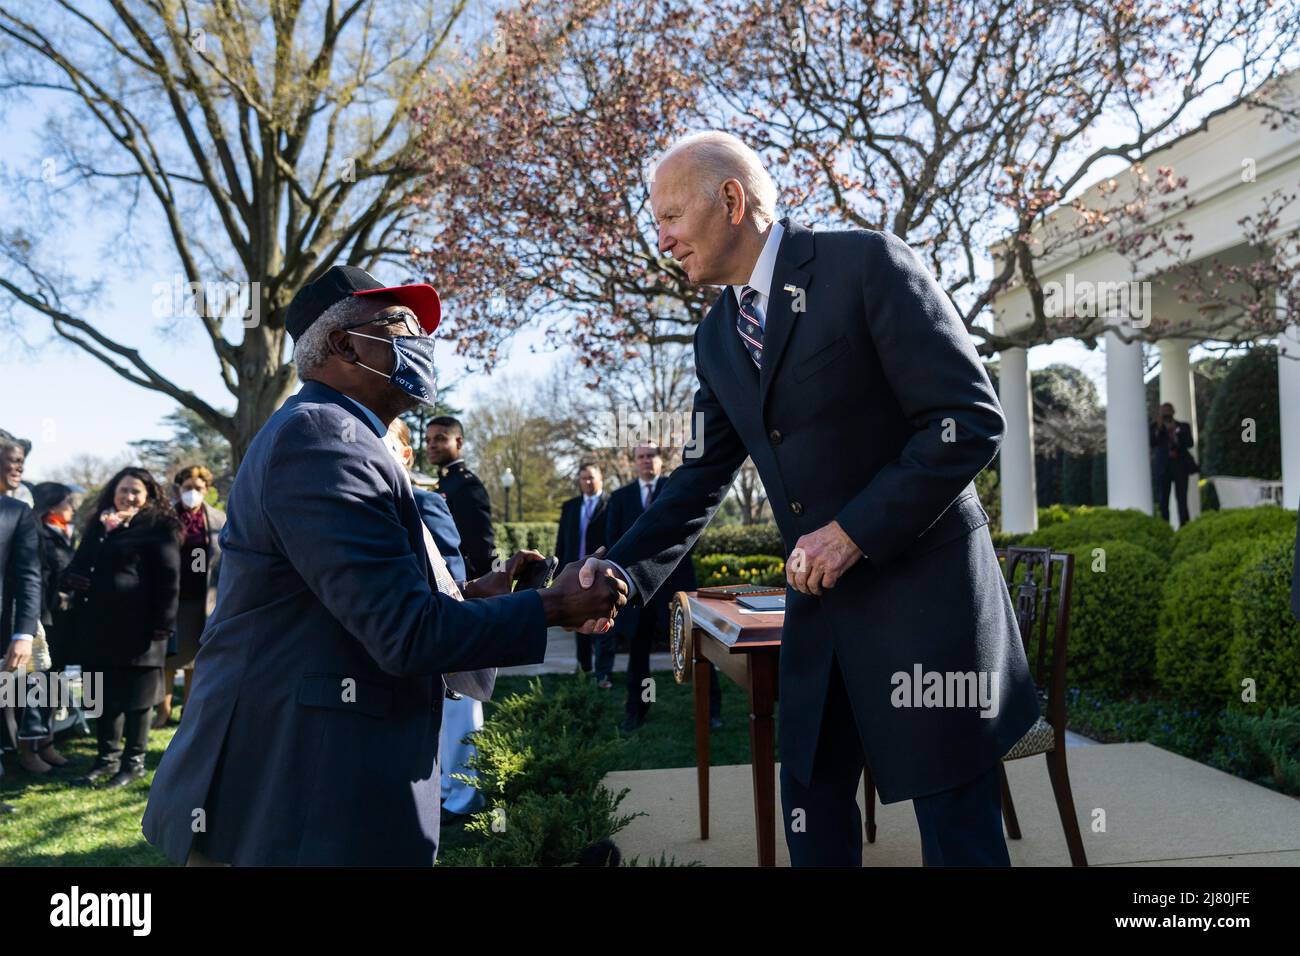 U.S President Joe Biden greets guests after signing H.R. 55, the Emmett Till Anti-lynching Act, in the Rose Garden of the White House, March 29, 2022 in Washington, D.C. Stock Photo